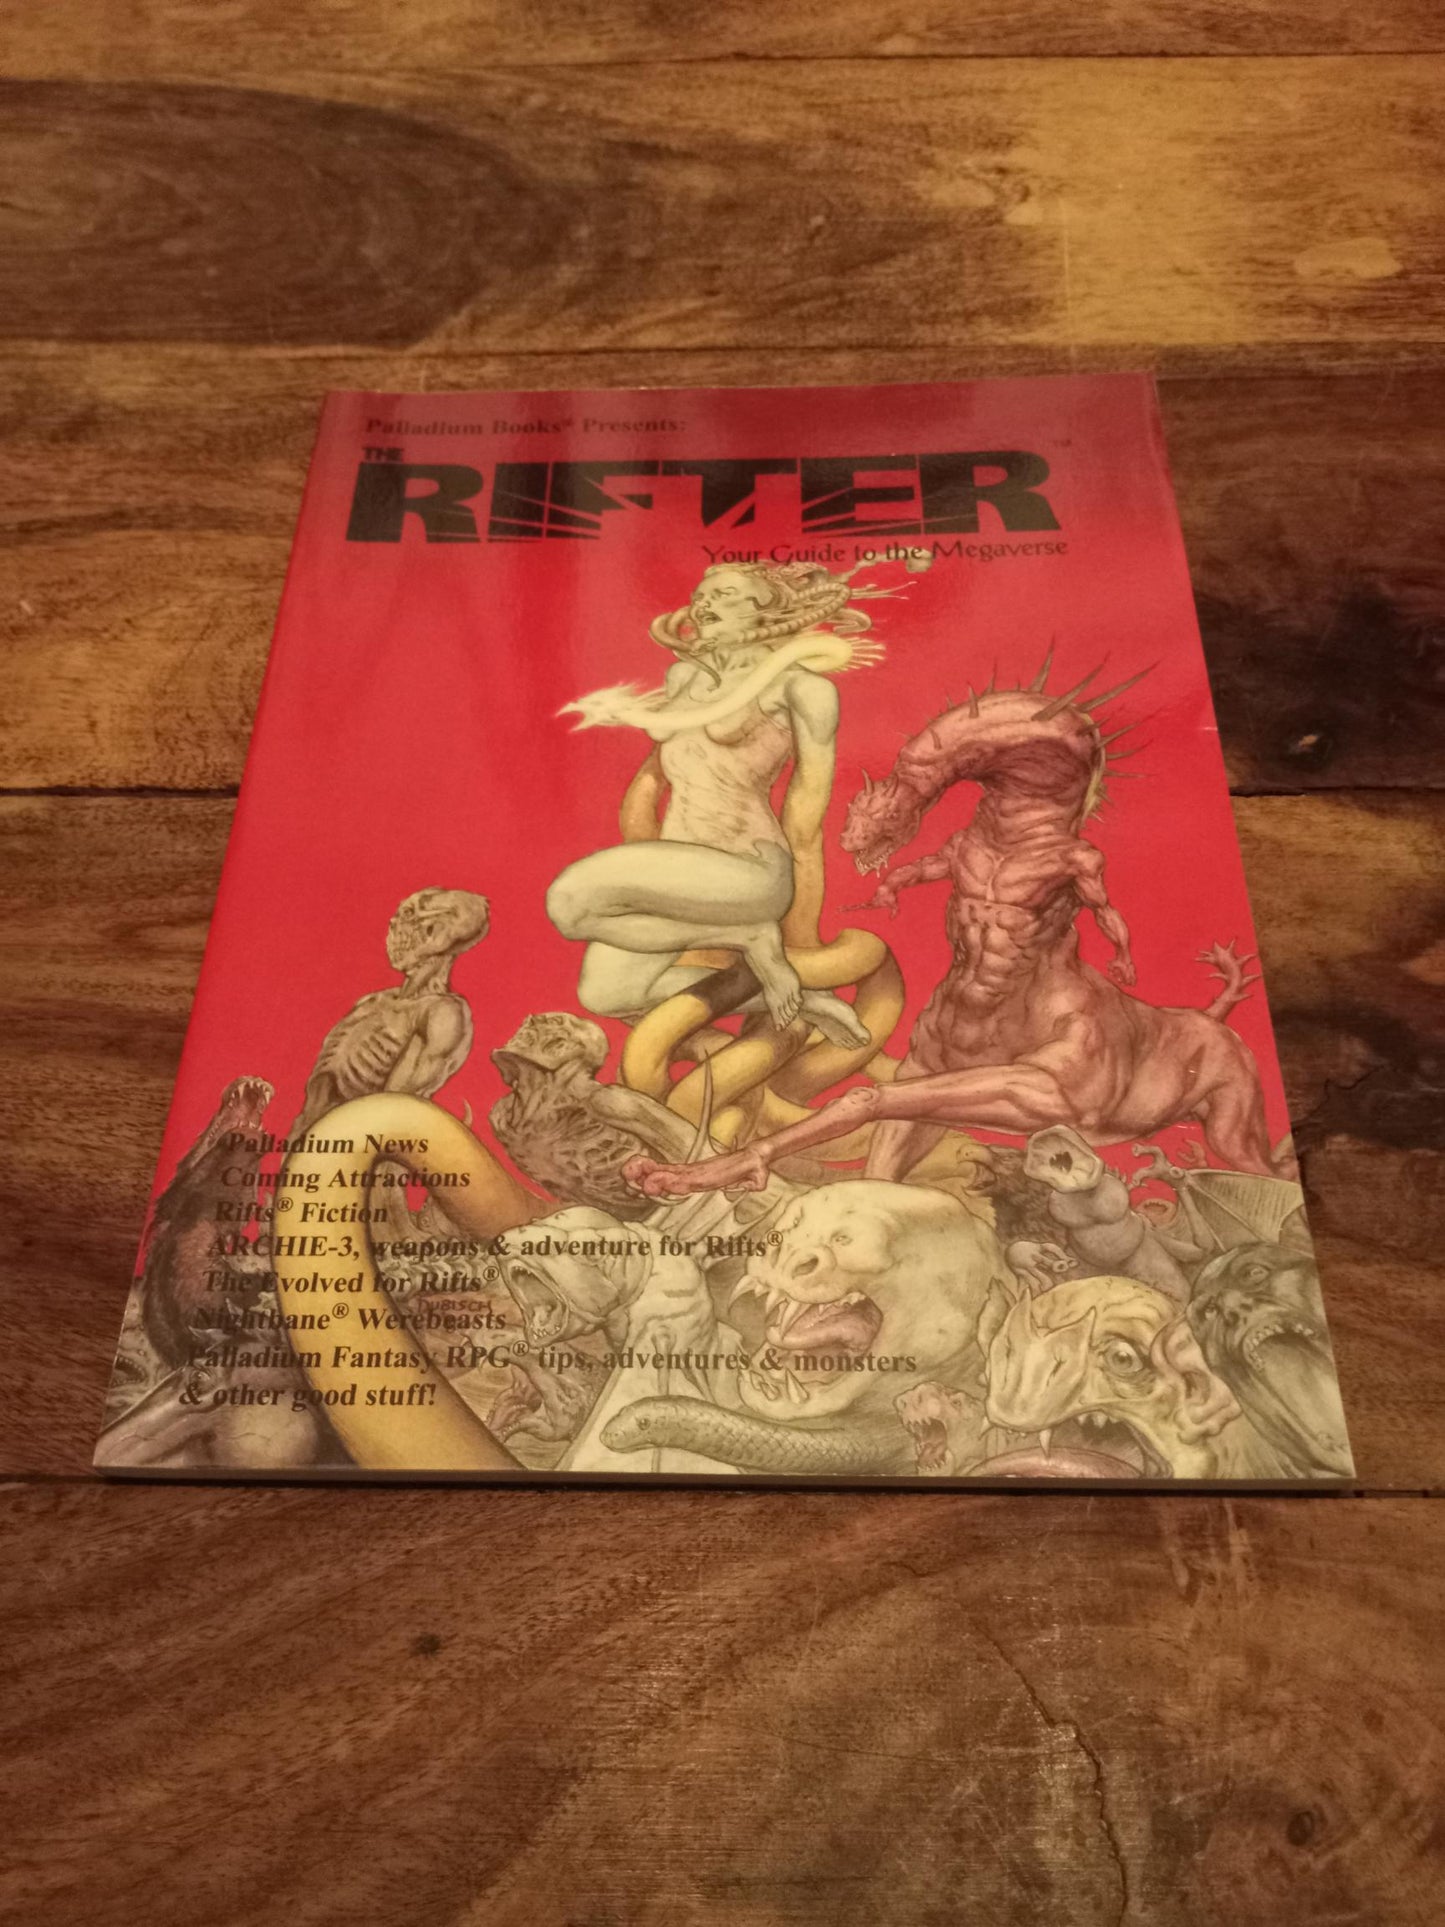 The Rifter #4 Your Guide to the Megaverse Palladium 1998